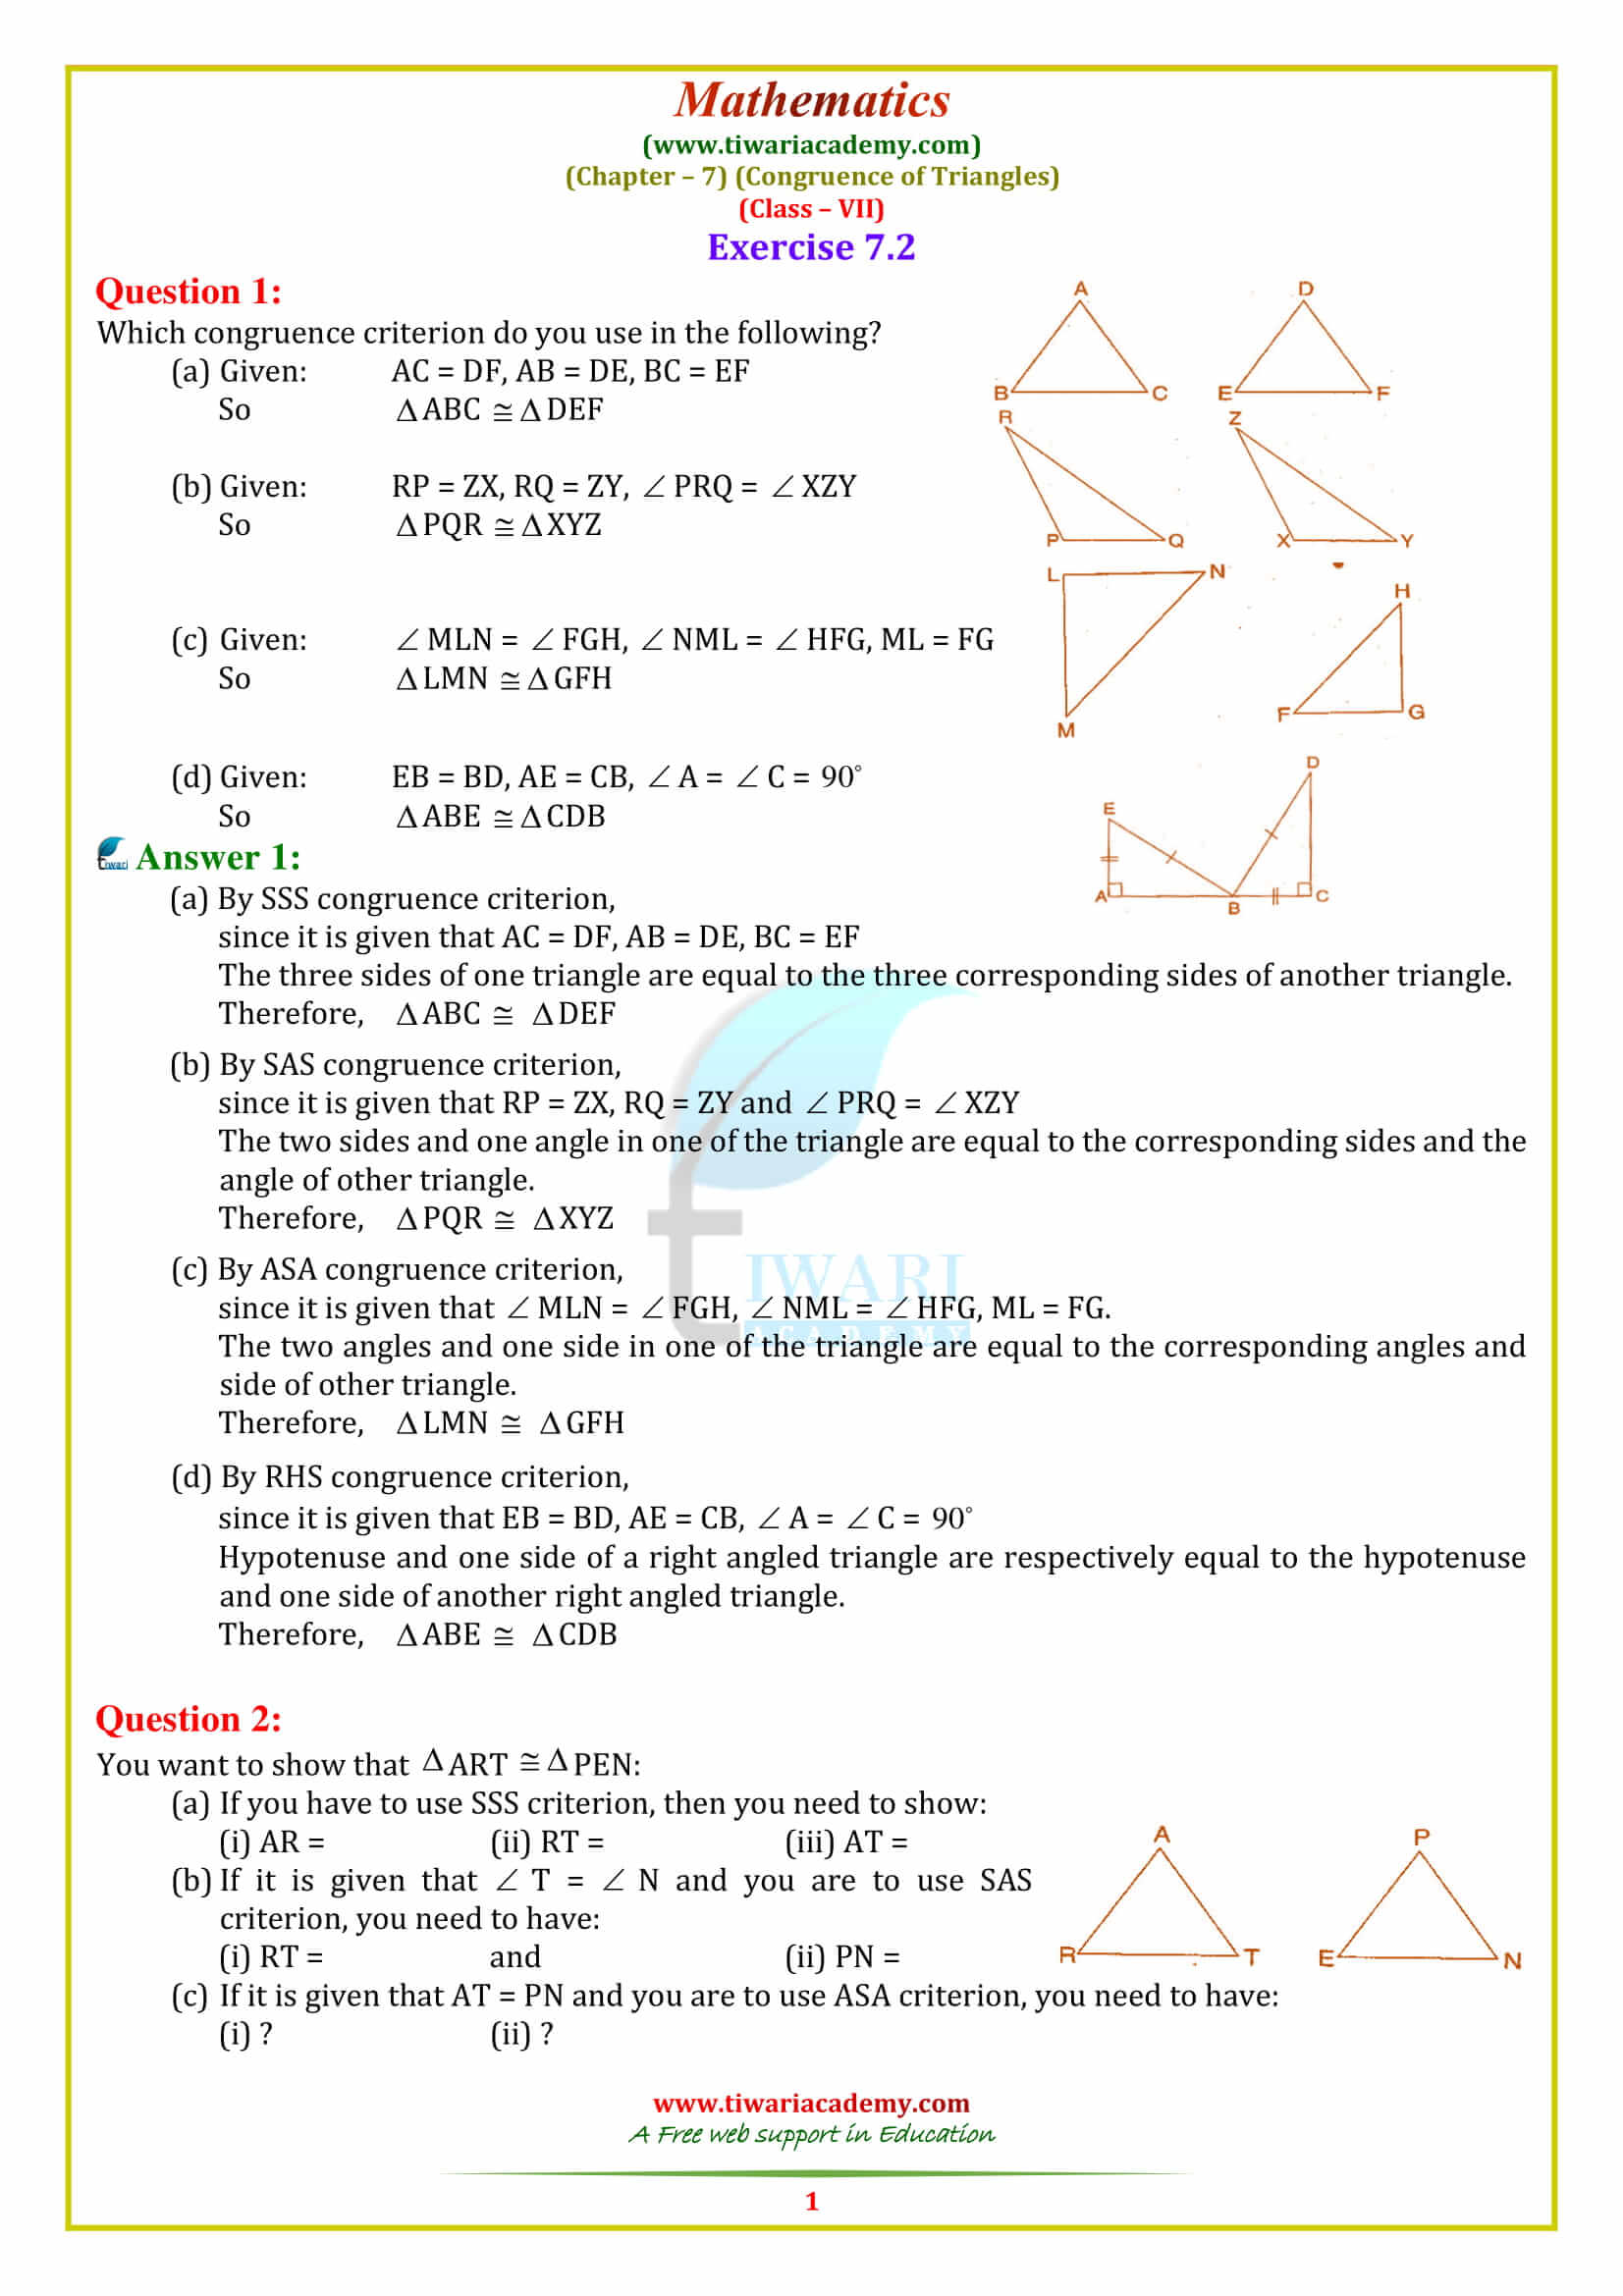 NCERT Solutions for Class 7 Maths Chapter 7 Congruence of Triangles Exercise 7.2 in English